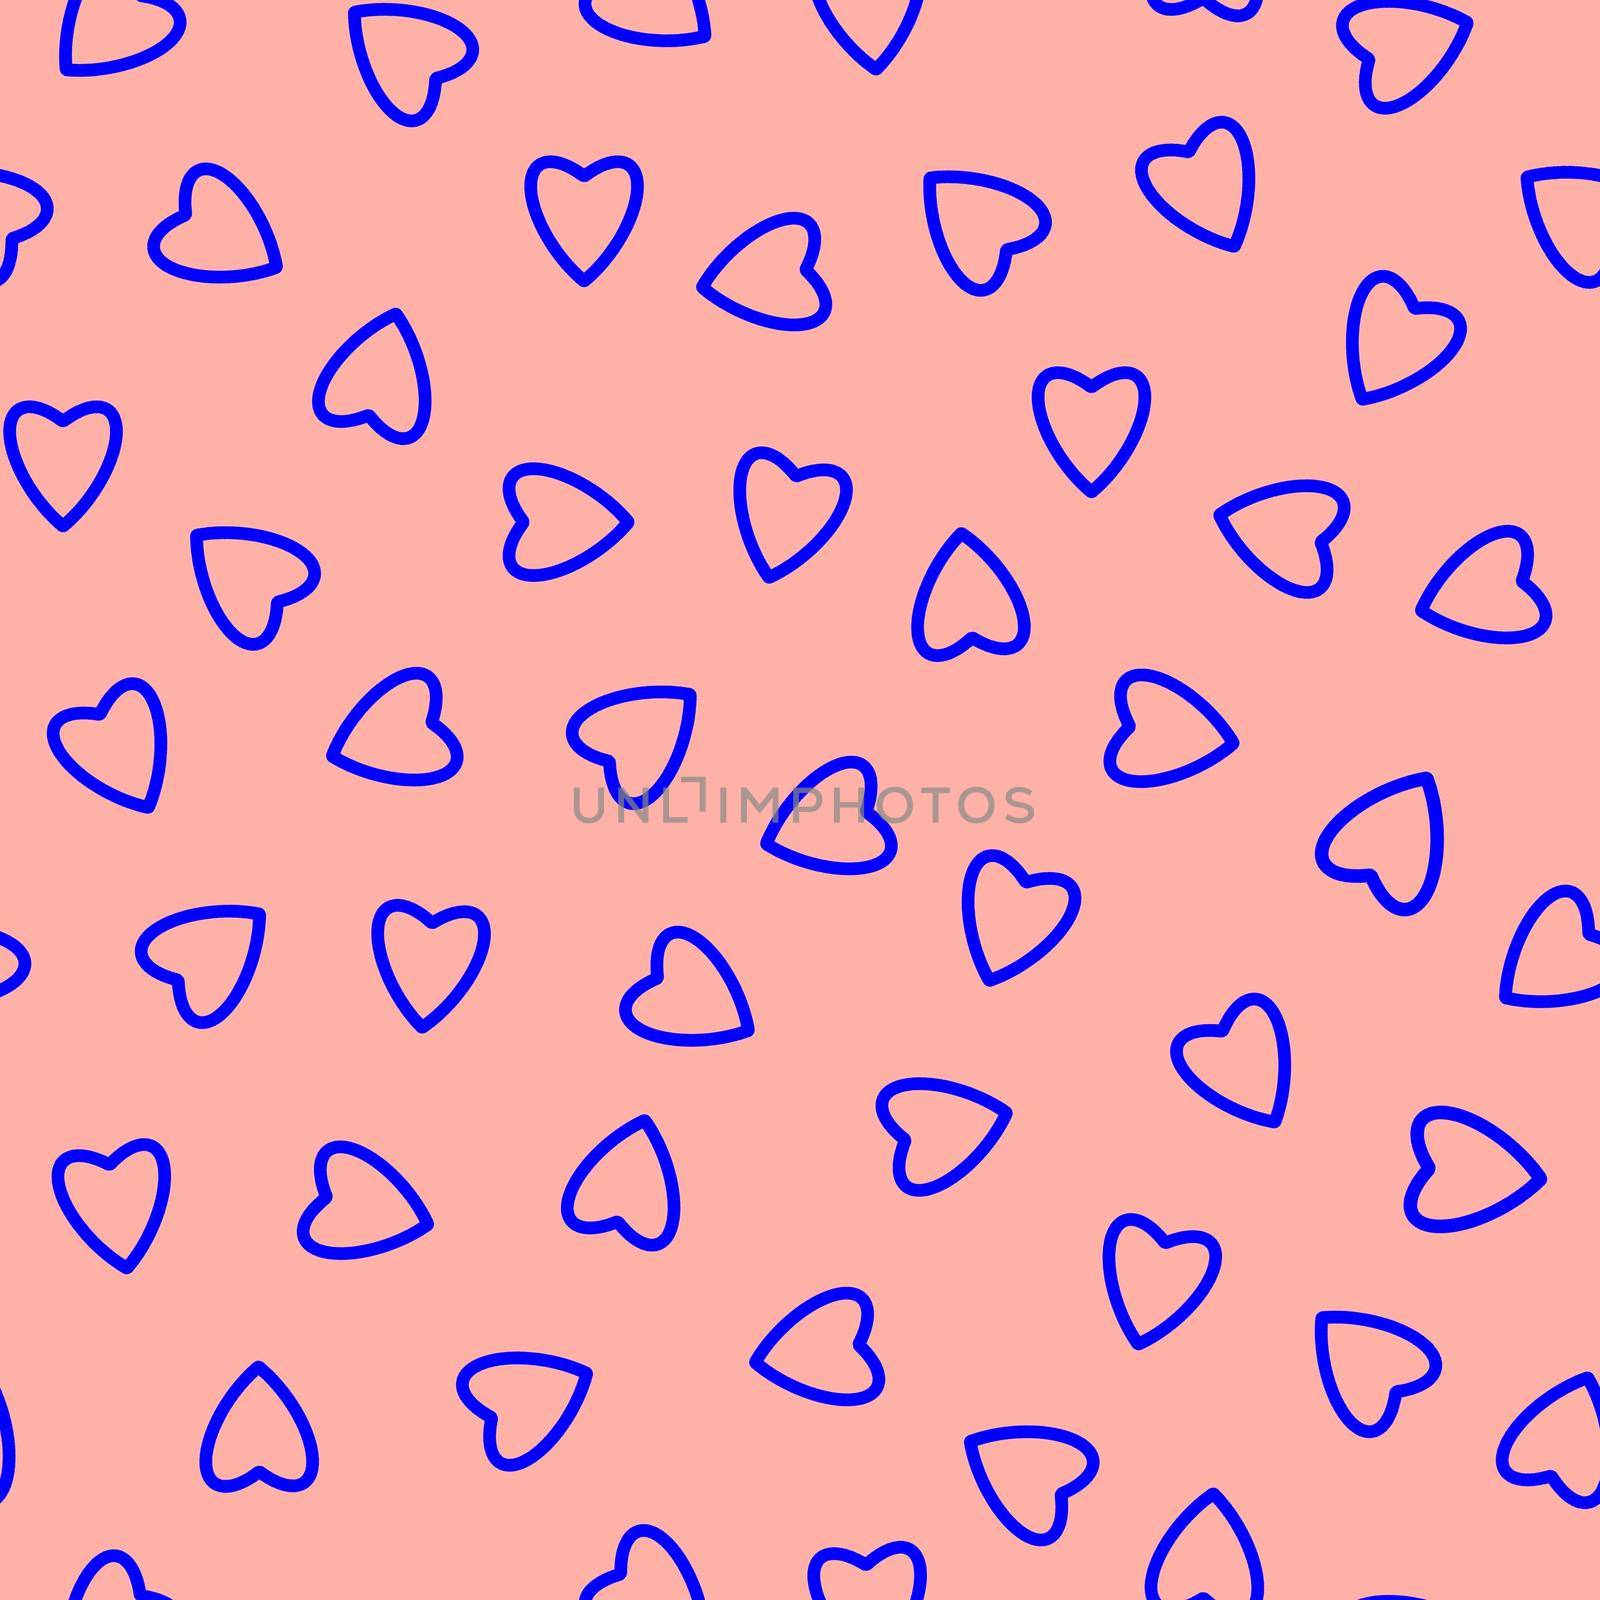 Simple hearts seamless pattern,endless chaotic texture made of tiny heart silhouettes.Valentines,mothers day background.Great for Easter,wedding,scrapbook,gift wrapping paper,textiles.Blue on peach by Angelsmoon